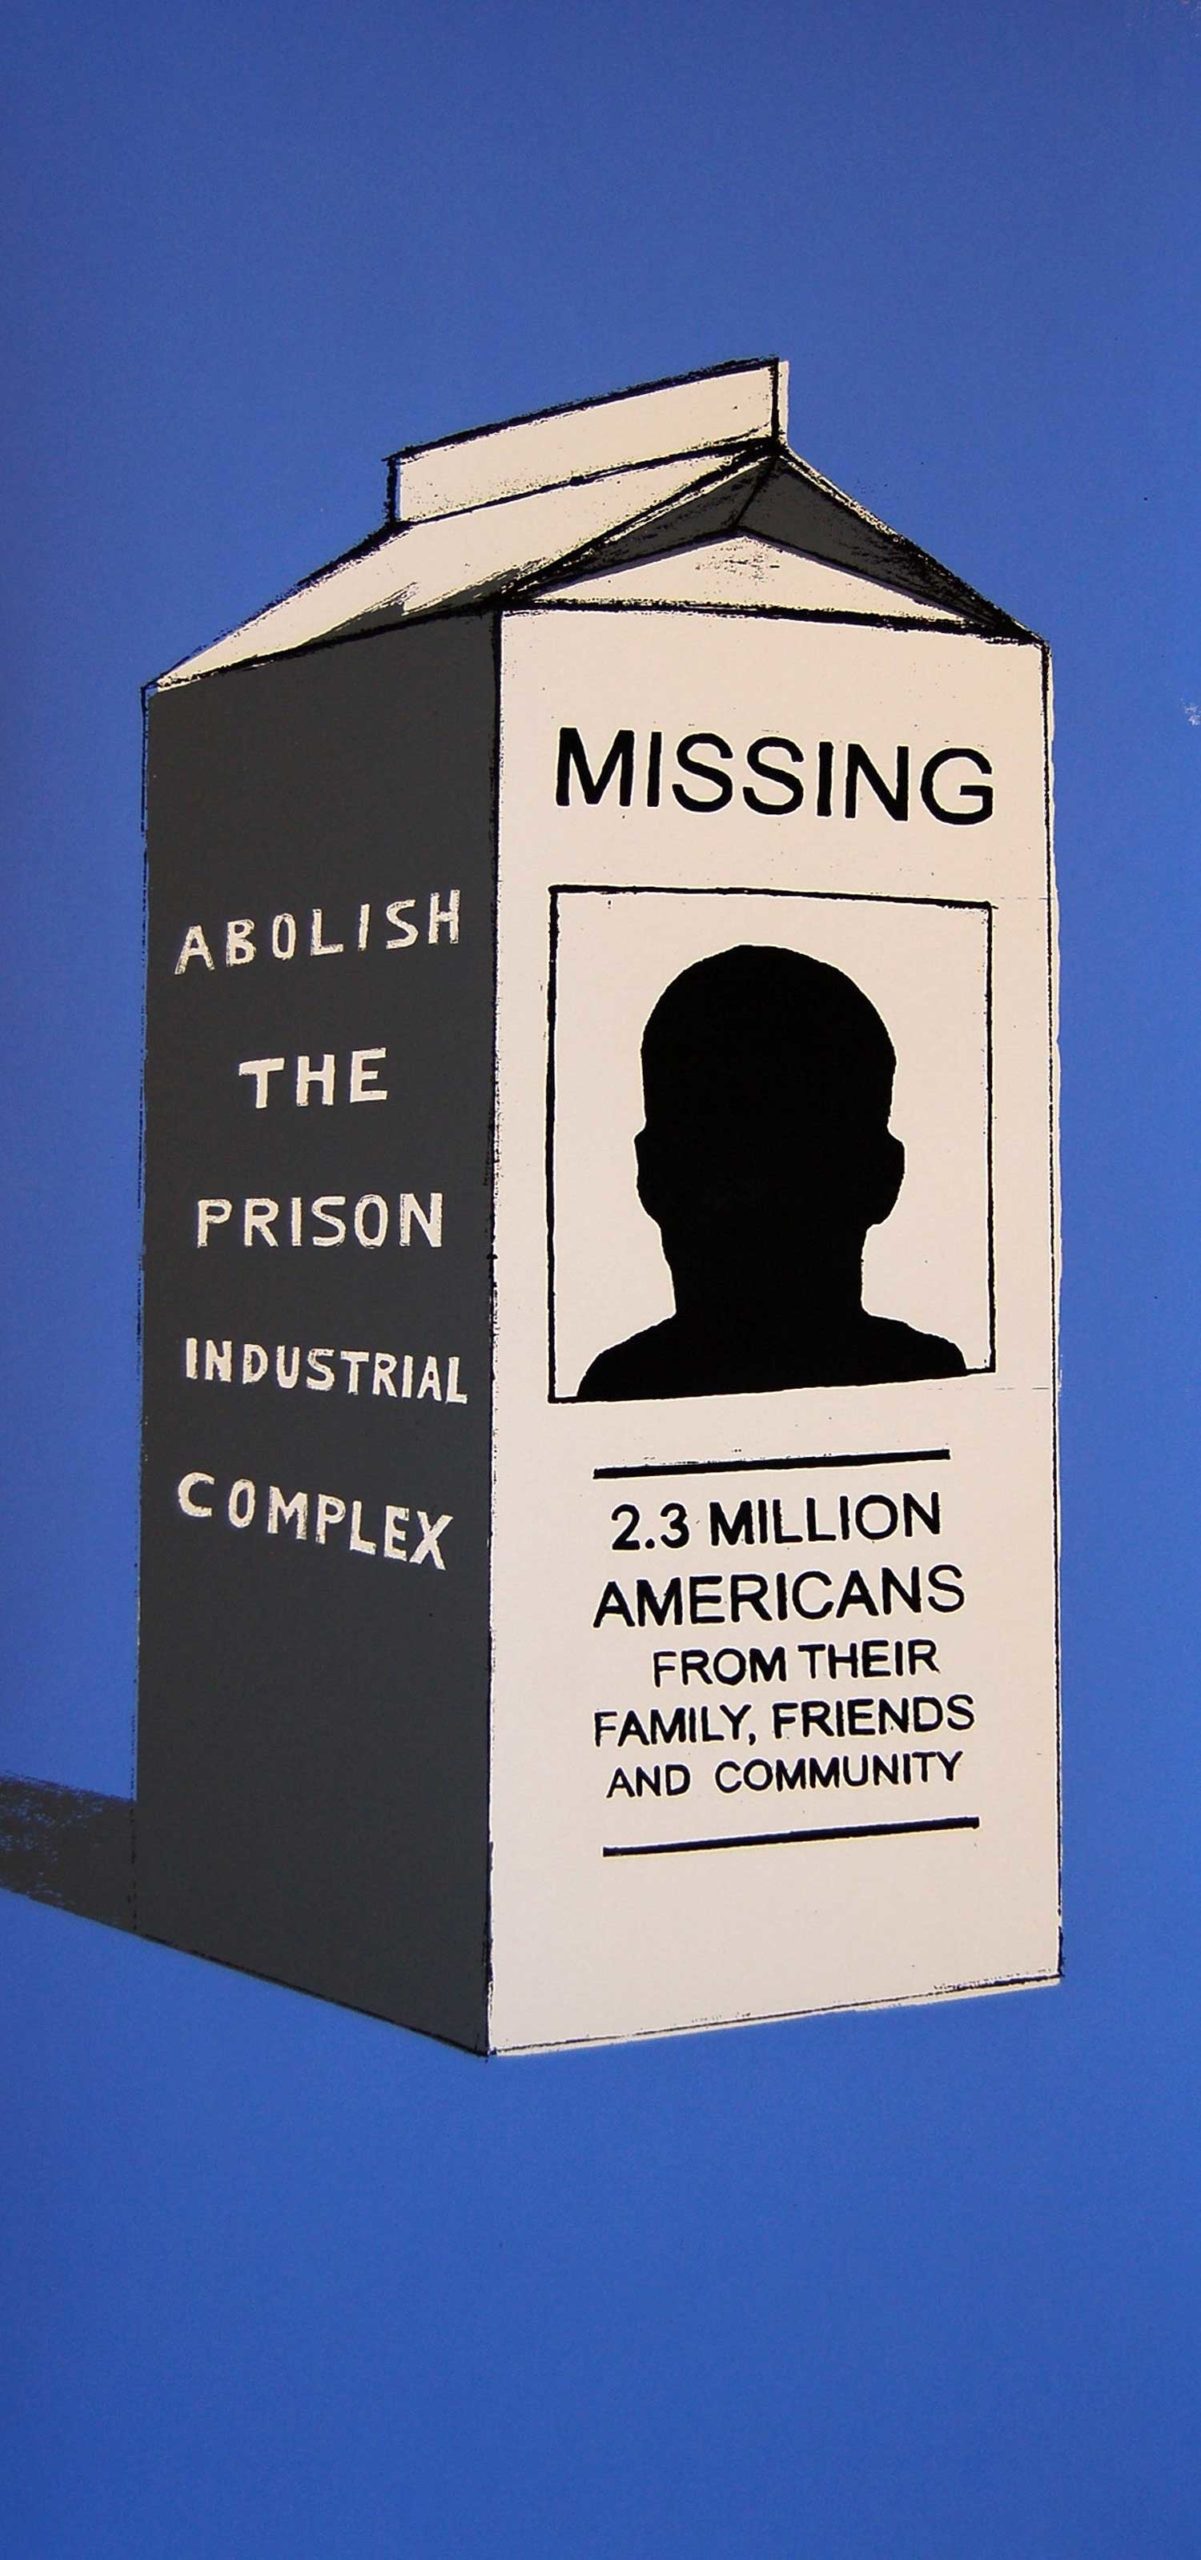 An abolitionist message using a missing persons milk carton. Details in text